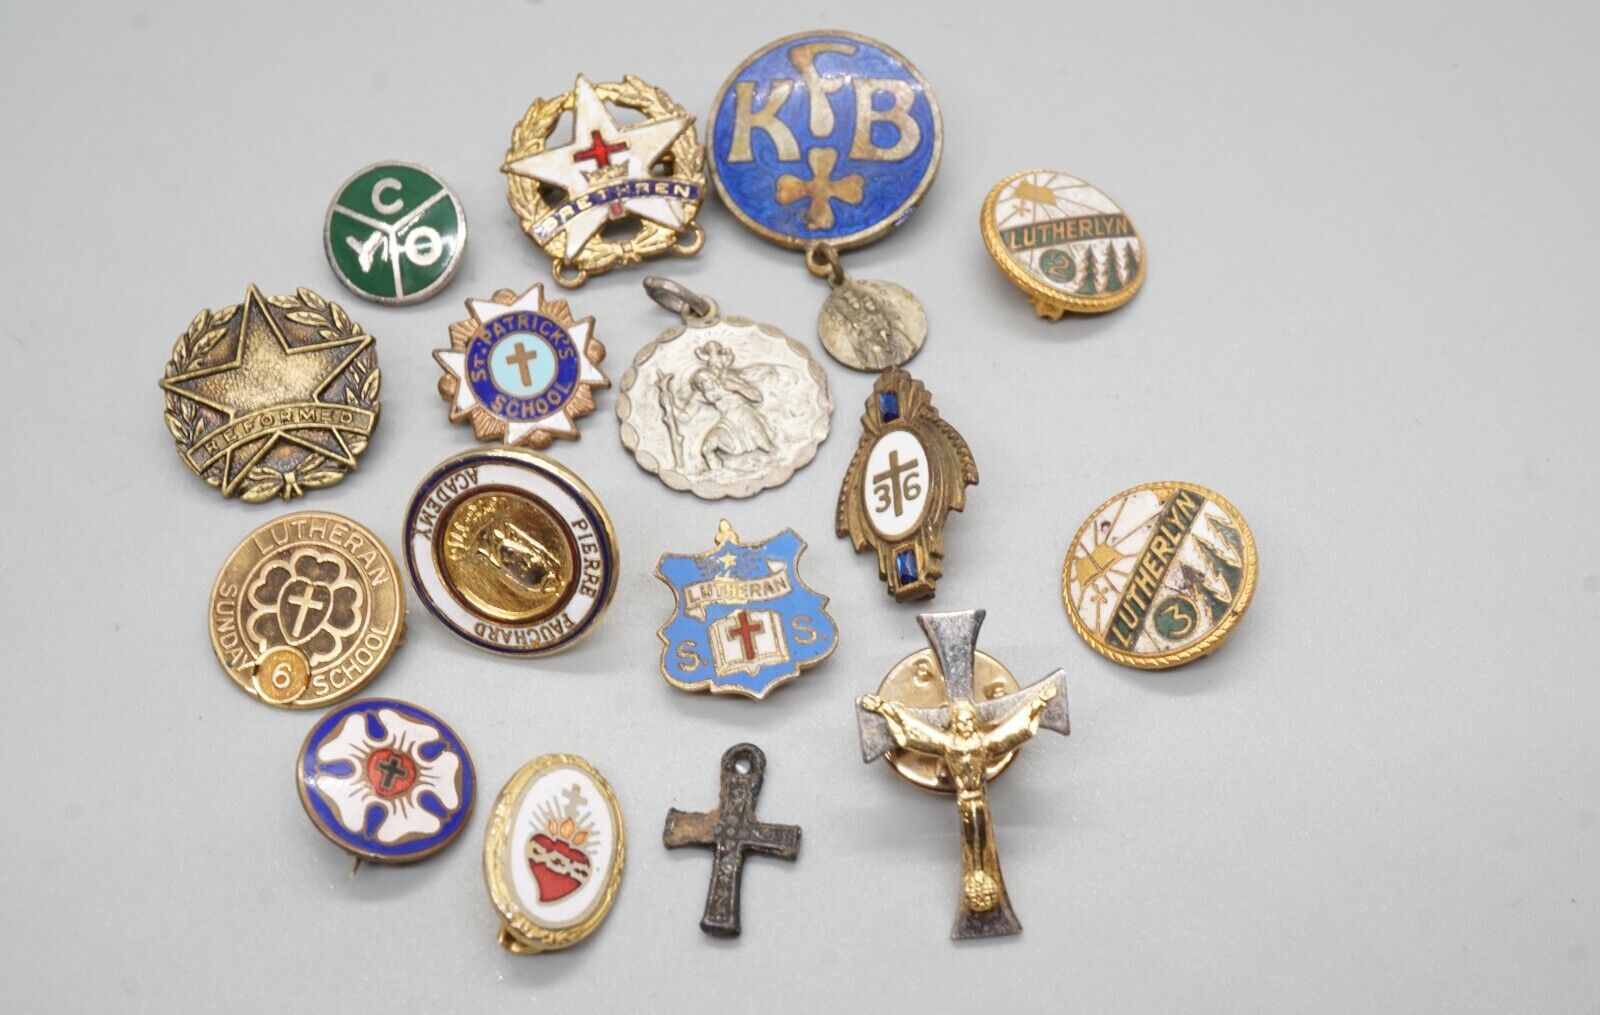 Vintage 1900s - 1960s Christian Pins & Medals Lot Of 16